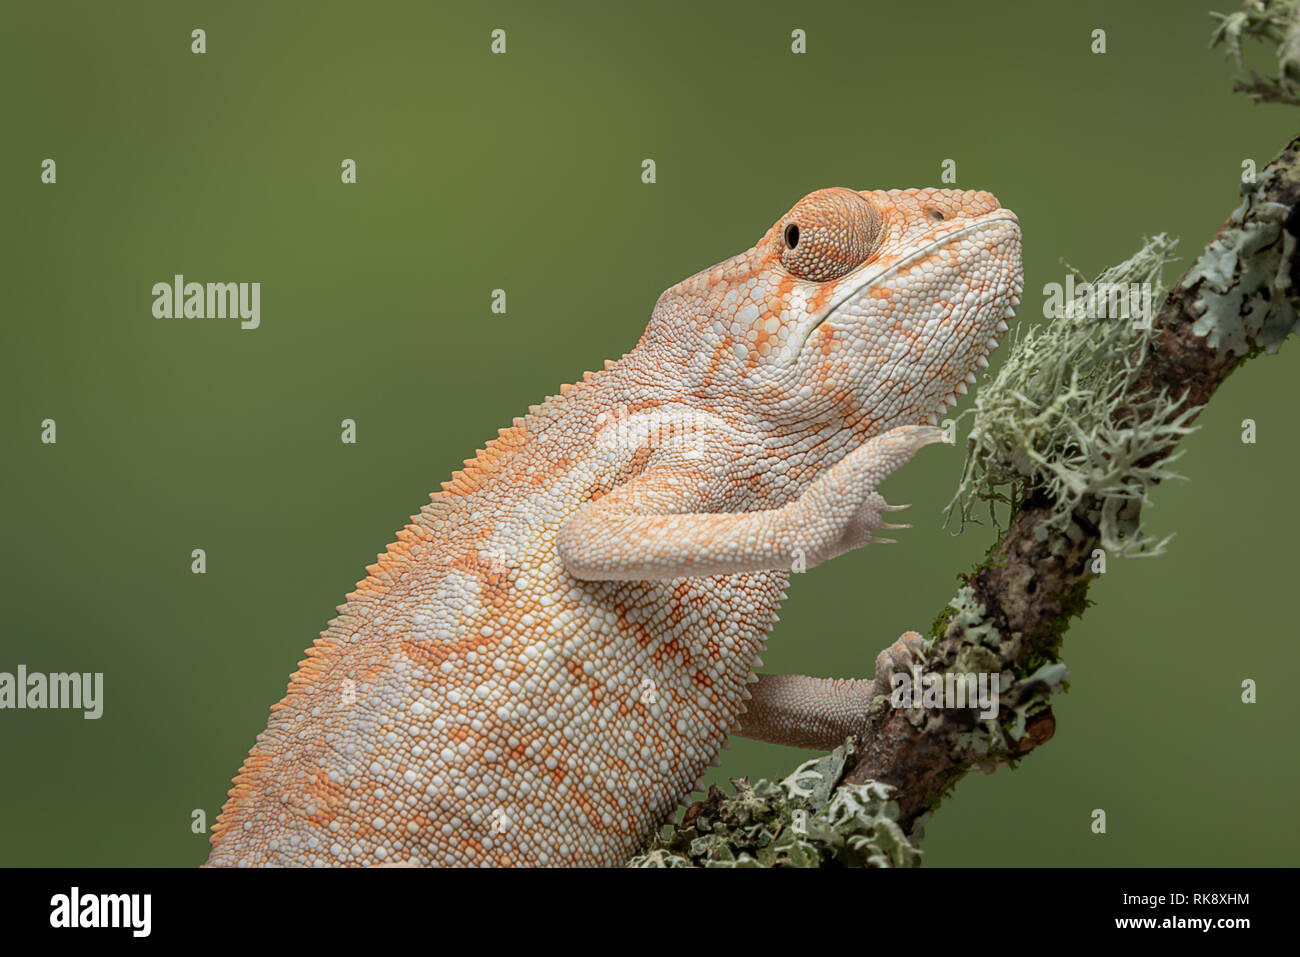 A half length portrait of a chameleon climbing up a branch with a plain green background Stock Photo